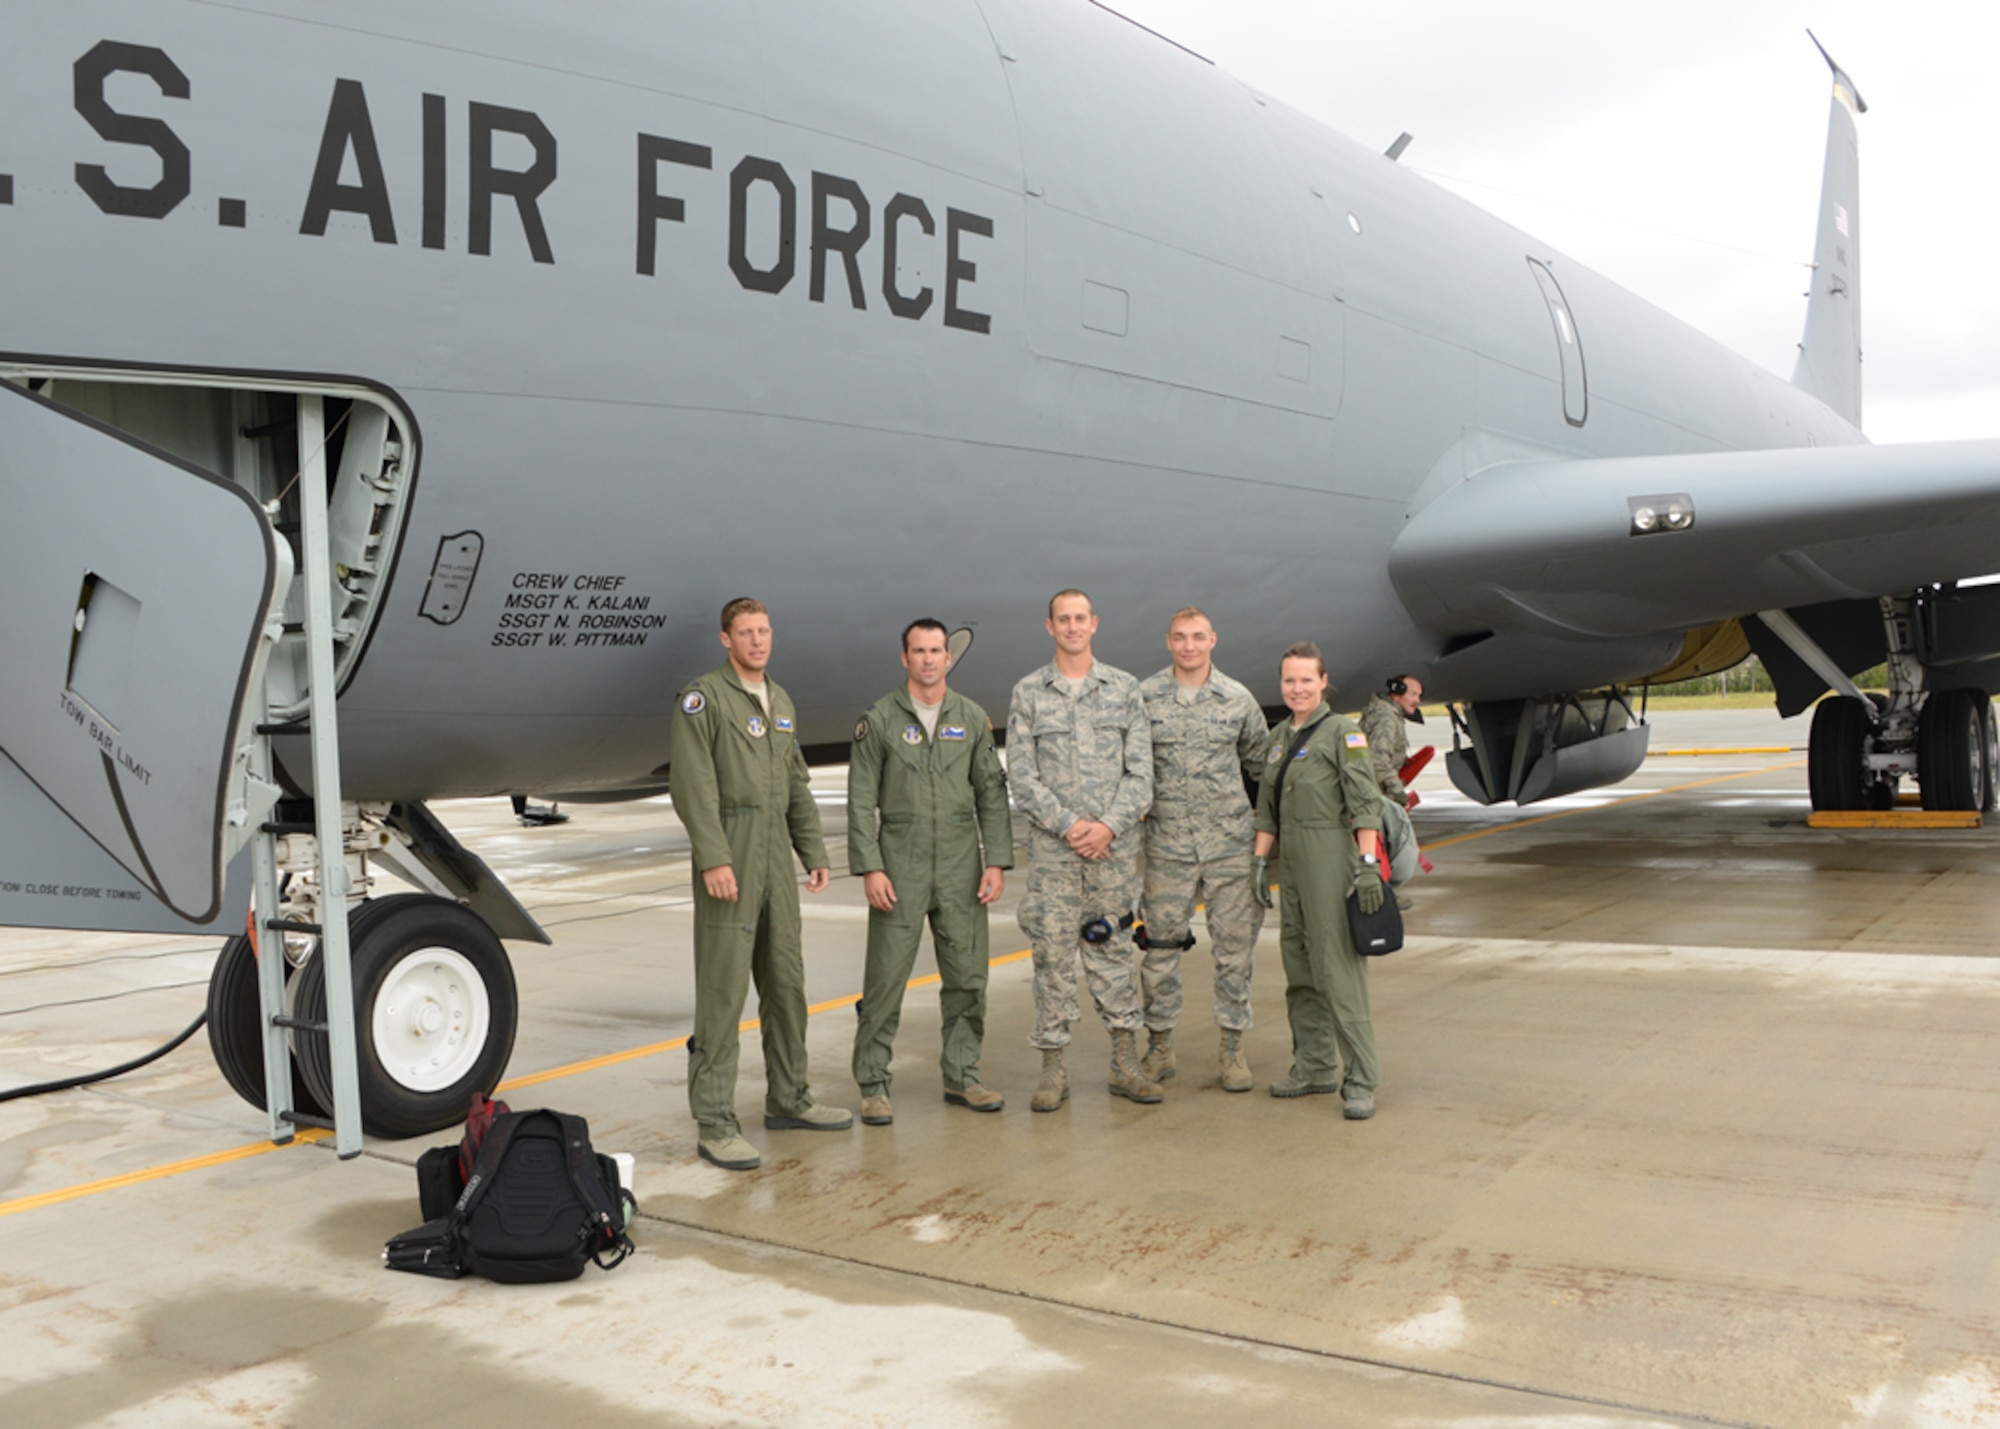 Airman 1st Class Joseph Fisher and Senior Airman Jesse Swain pose with the crew of a KC-135 Stratotanker after their incentive flight for outstanding work performed during Exercise Red Flag 14-3 with the 175th Maintenance Group, Maryland Air National Guard, Baltimore, Md., August 19, 2014. Exercise Red Flag is a 10 day exercise that is a series of Pacific Air Forces commander-directed field training exercises for U.S. forces, provides joint offensive counter-air, interdiction, close air support, and large force employment training in a simulated combat environment. (Air National Guard photo by Tech. Sgt. Christopher Schepers/RELEASED)